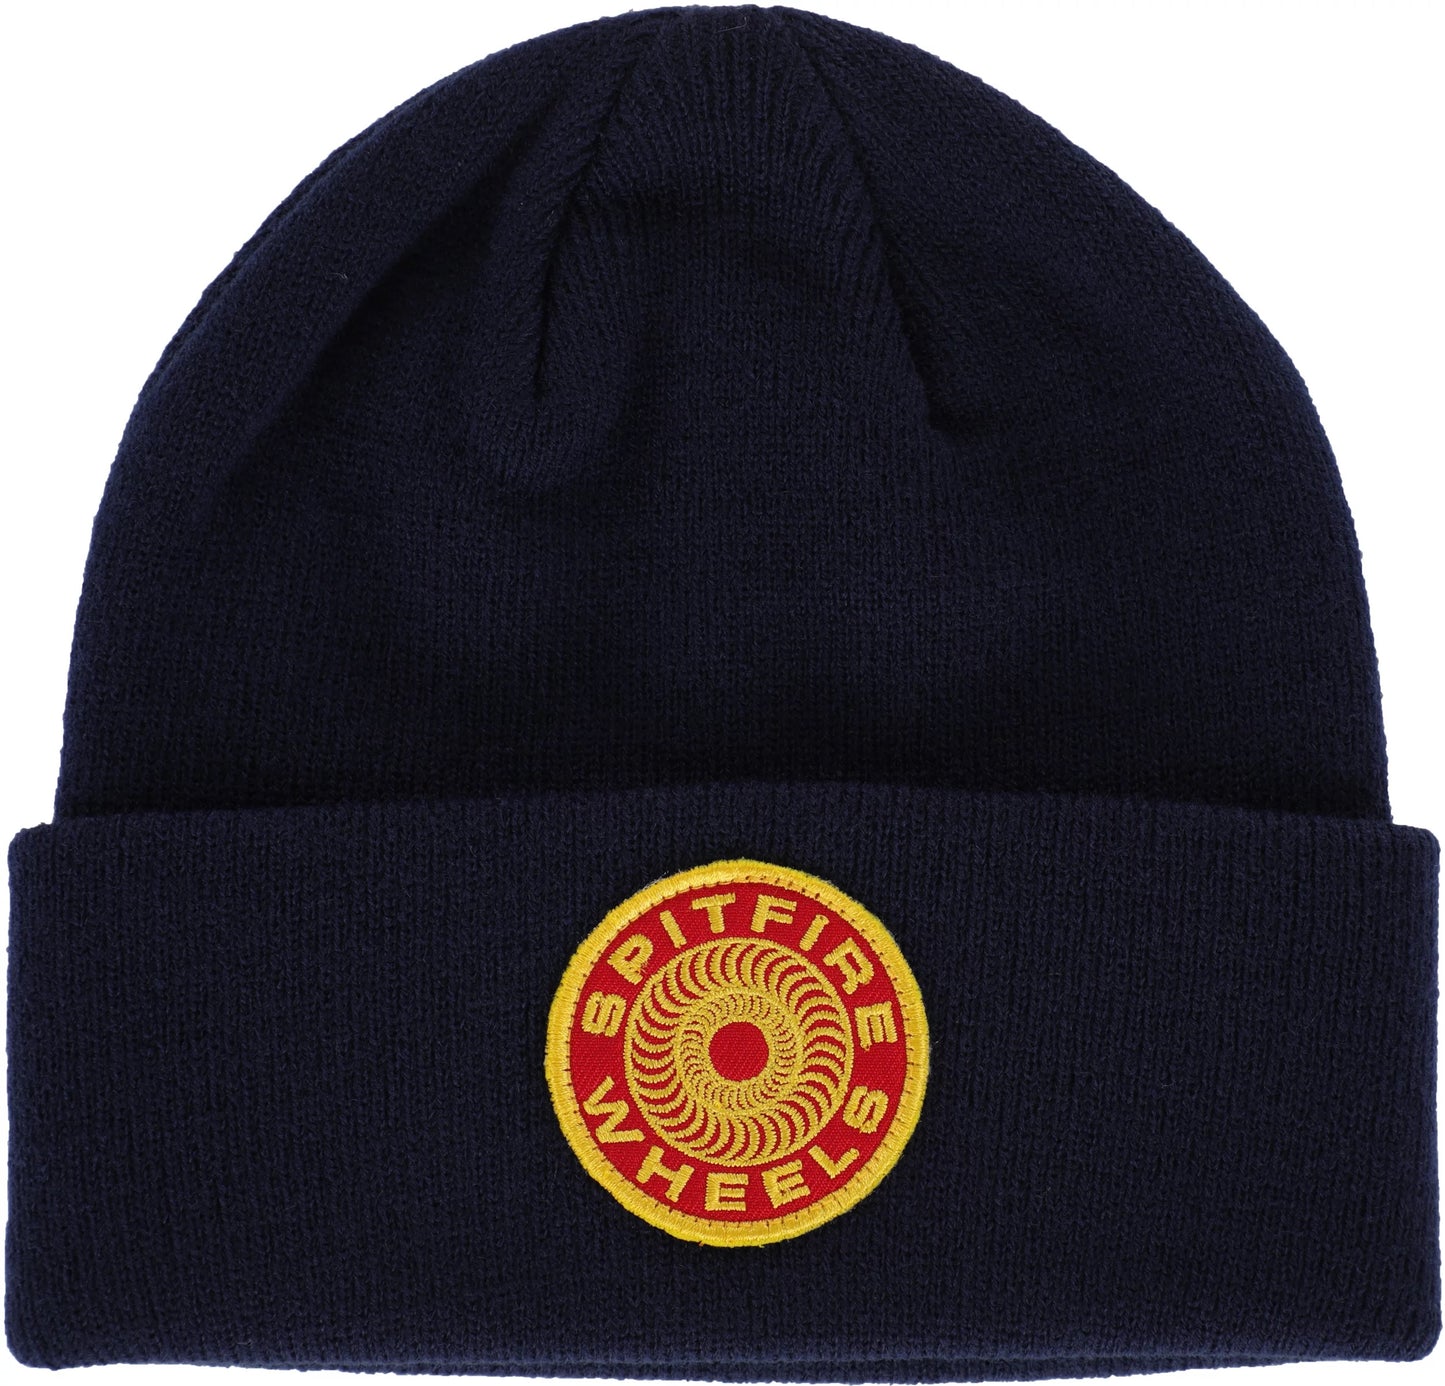 SPITFIRE CLASSIC 87 SWIRL PATCH CUFF BEANIE NAVY/RED/GOLD